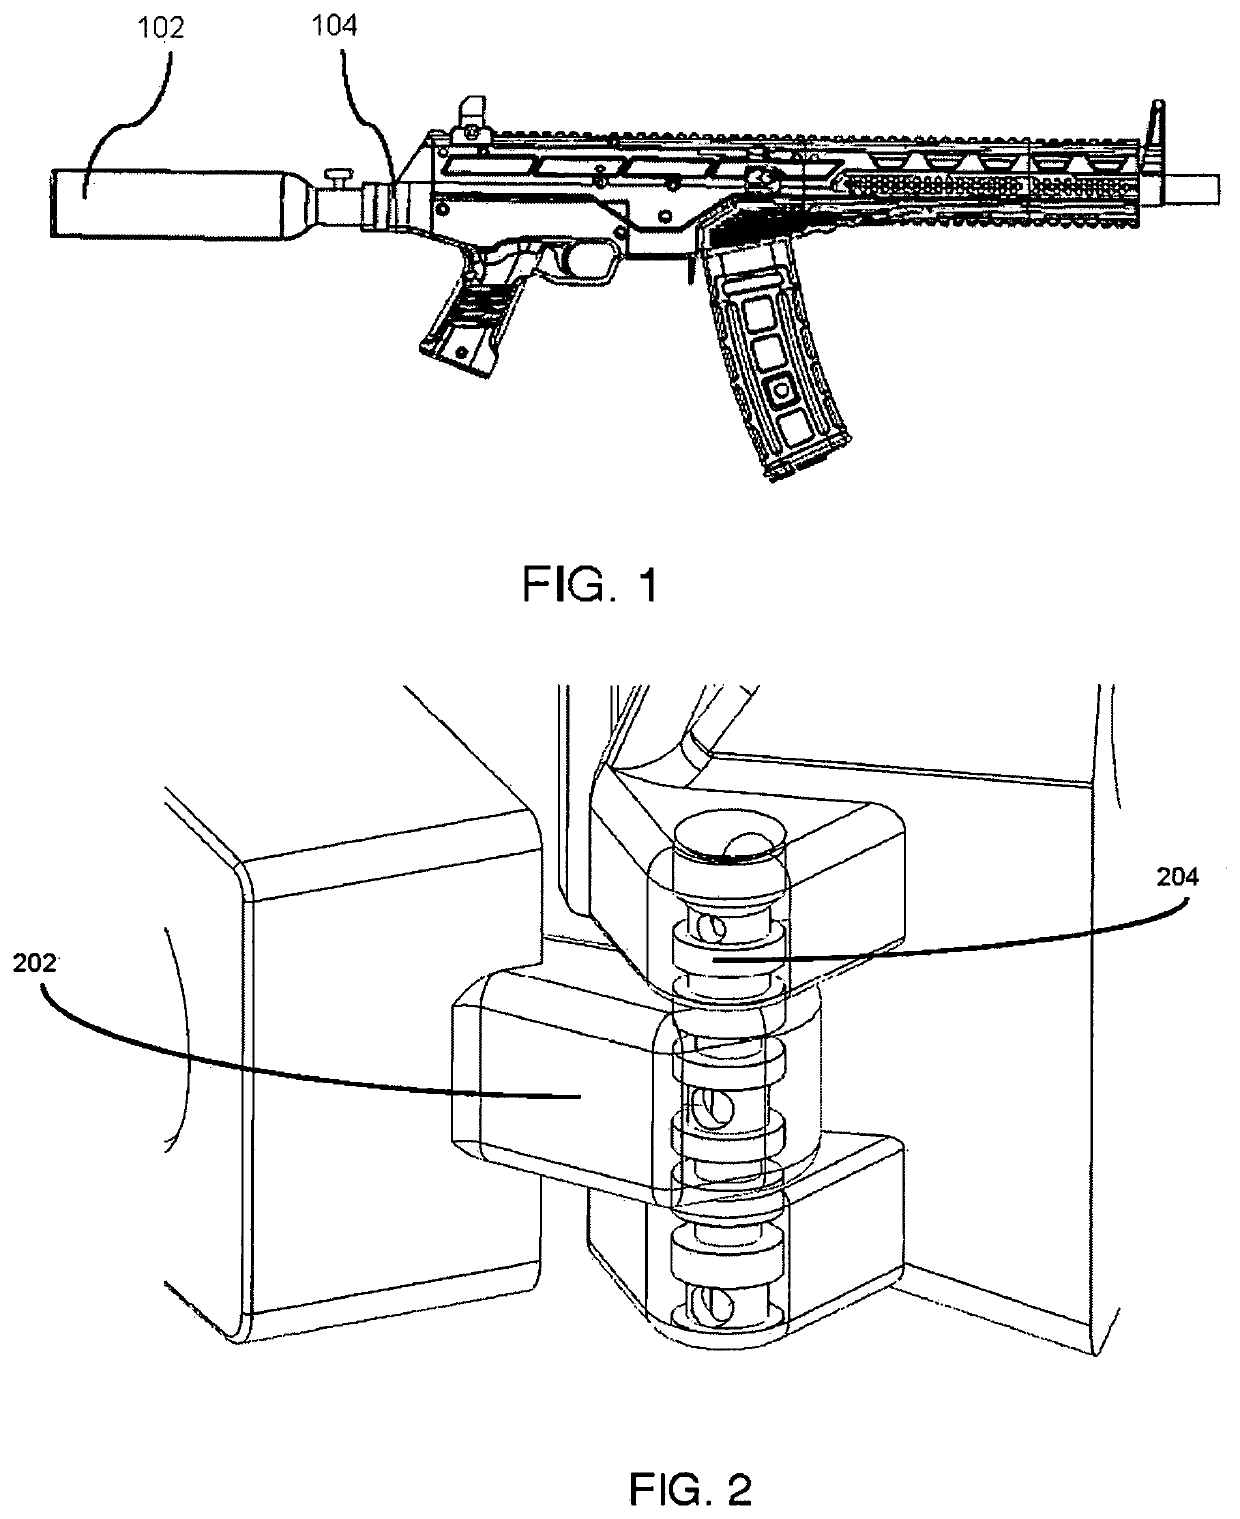 Foldable Buttstock Having Air Tank In Different Positions for pneumatic air gun